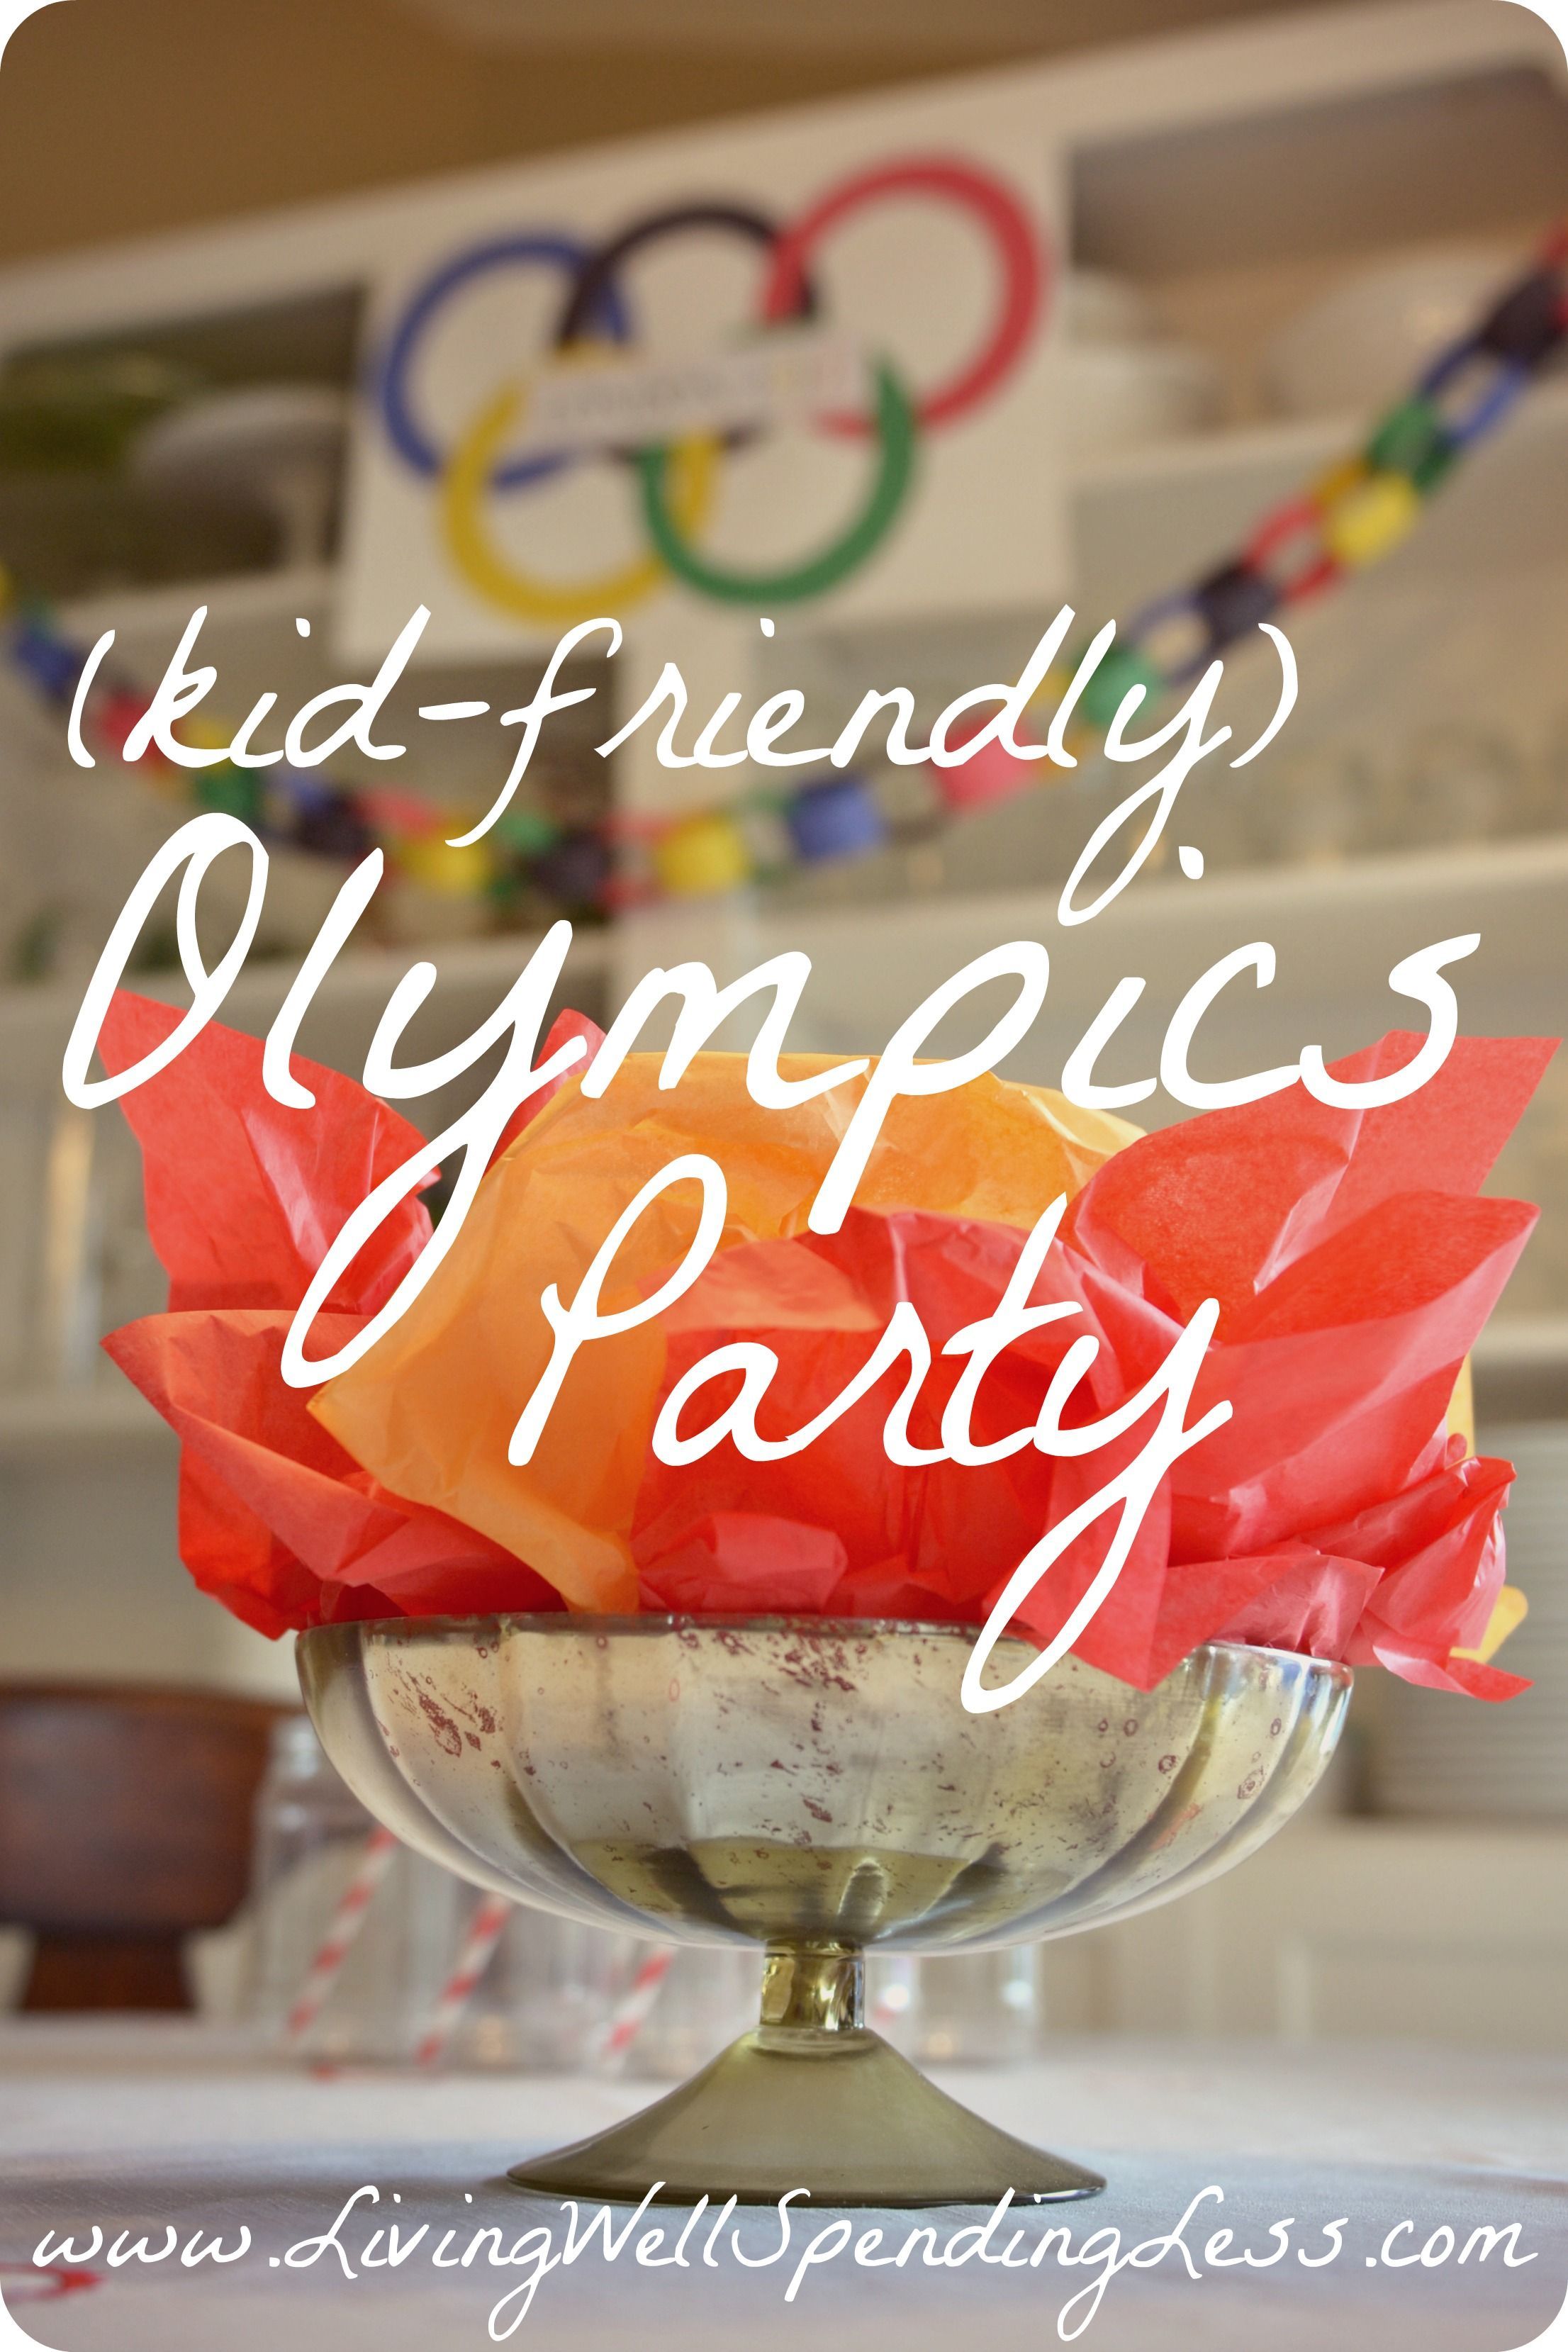 Are you ready for the next Olympics?  Don’t miss these super cute ideas for a simple, kid friendly Olympic